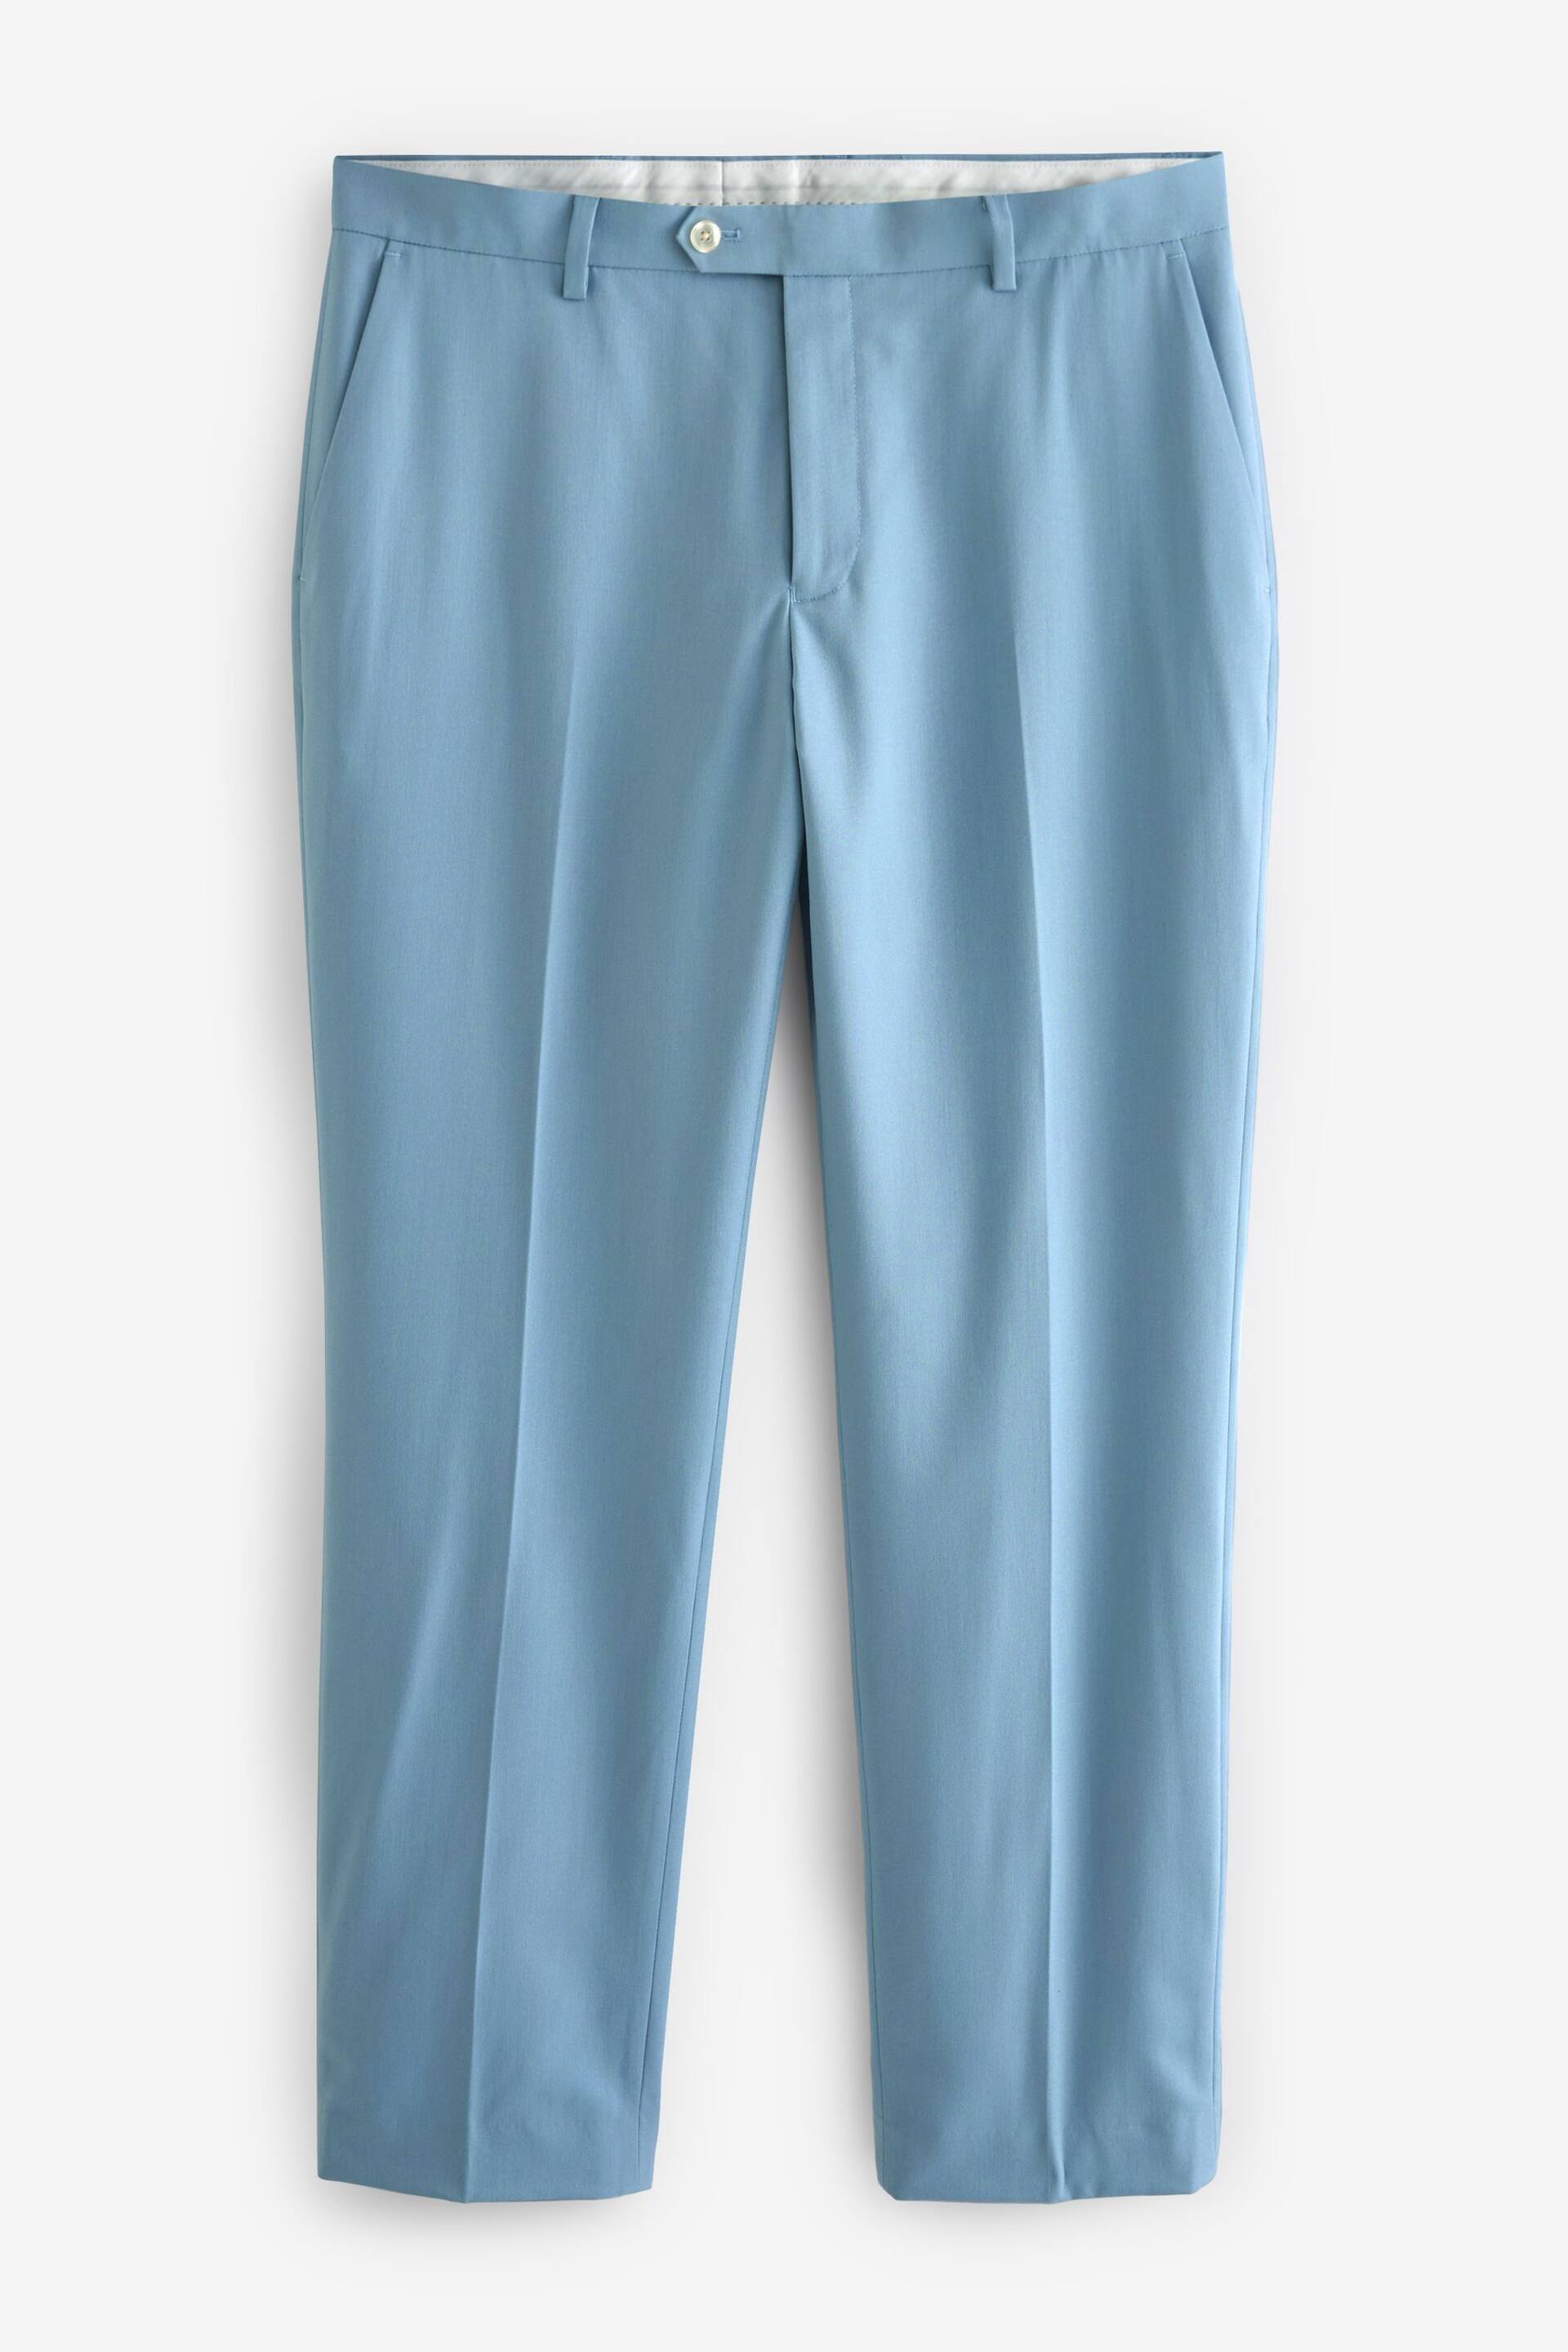 Light Blue Tailored Fit Motionflex Stretch Suit: Trousers - Image 5 of 8